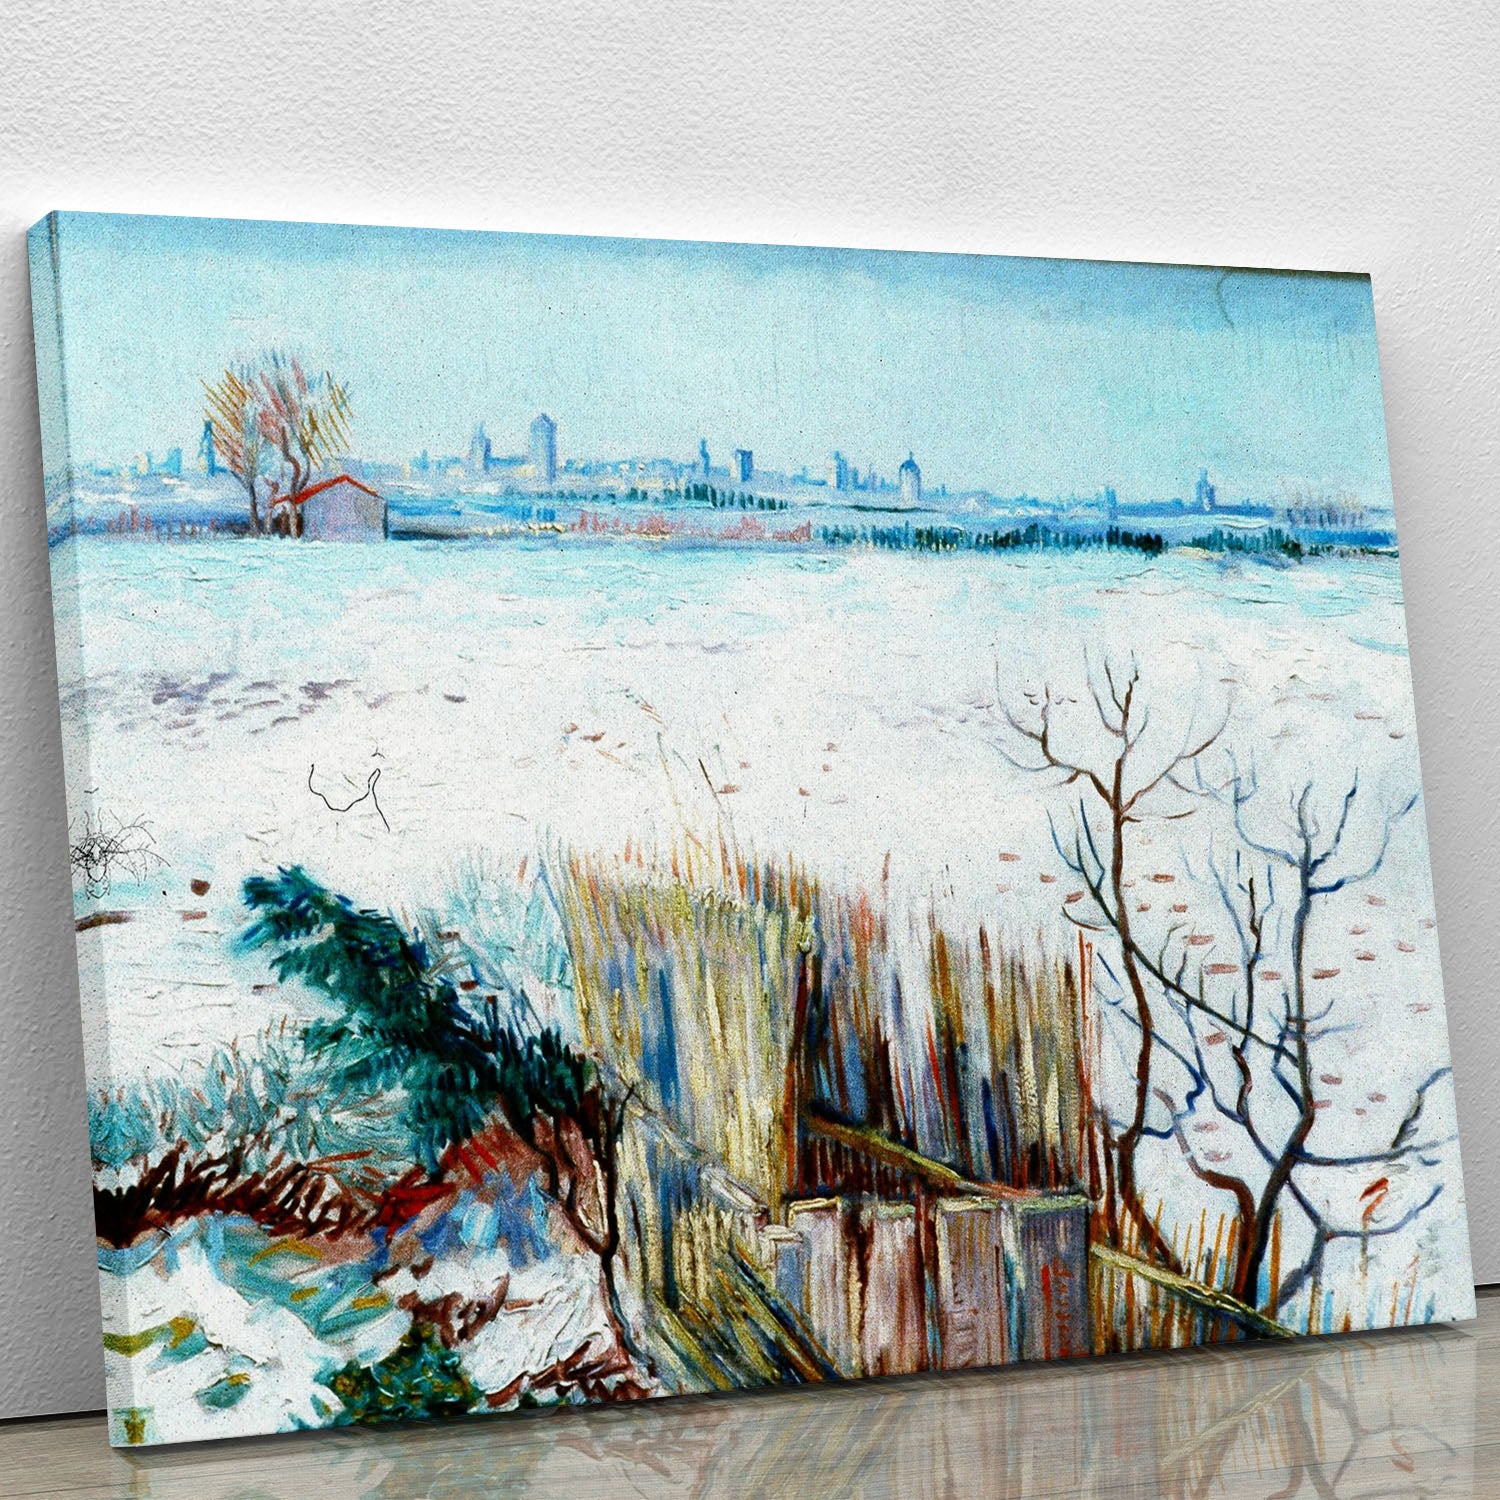 Snowy Landscape with Arles in the Background by Van Gogh Canvas Print or Poster - Canvas Art Rocks - 1